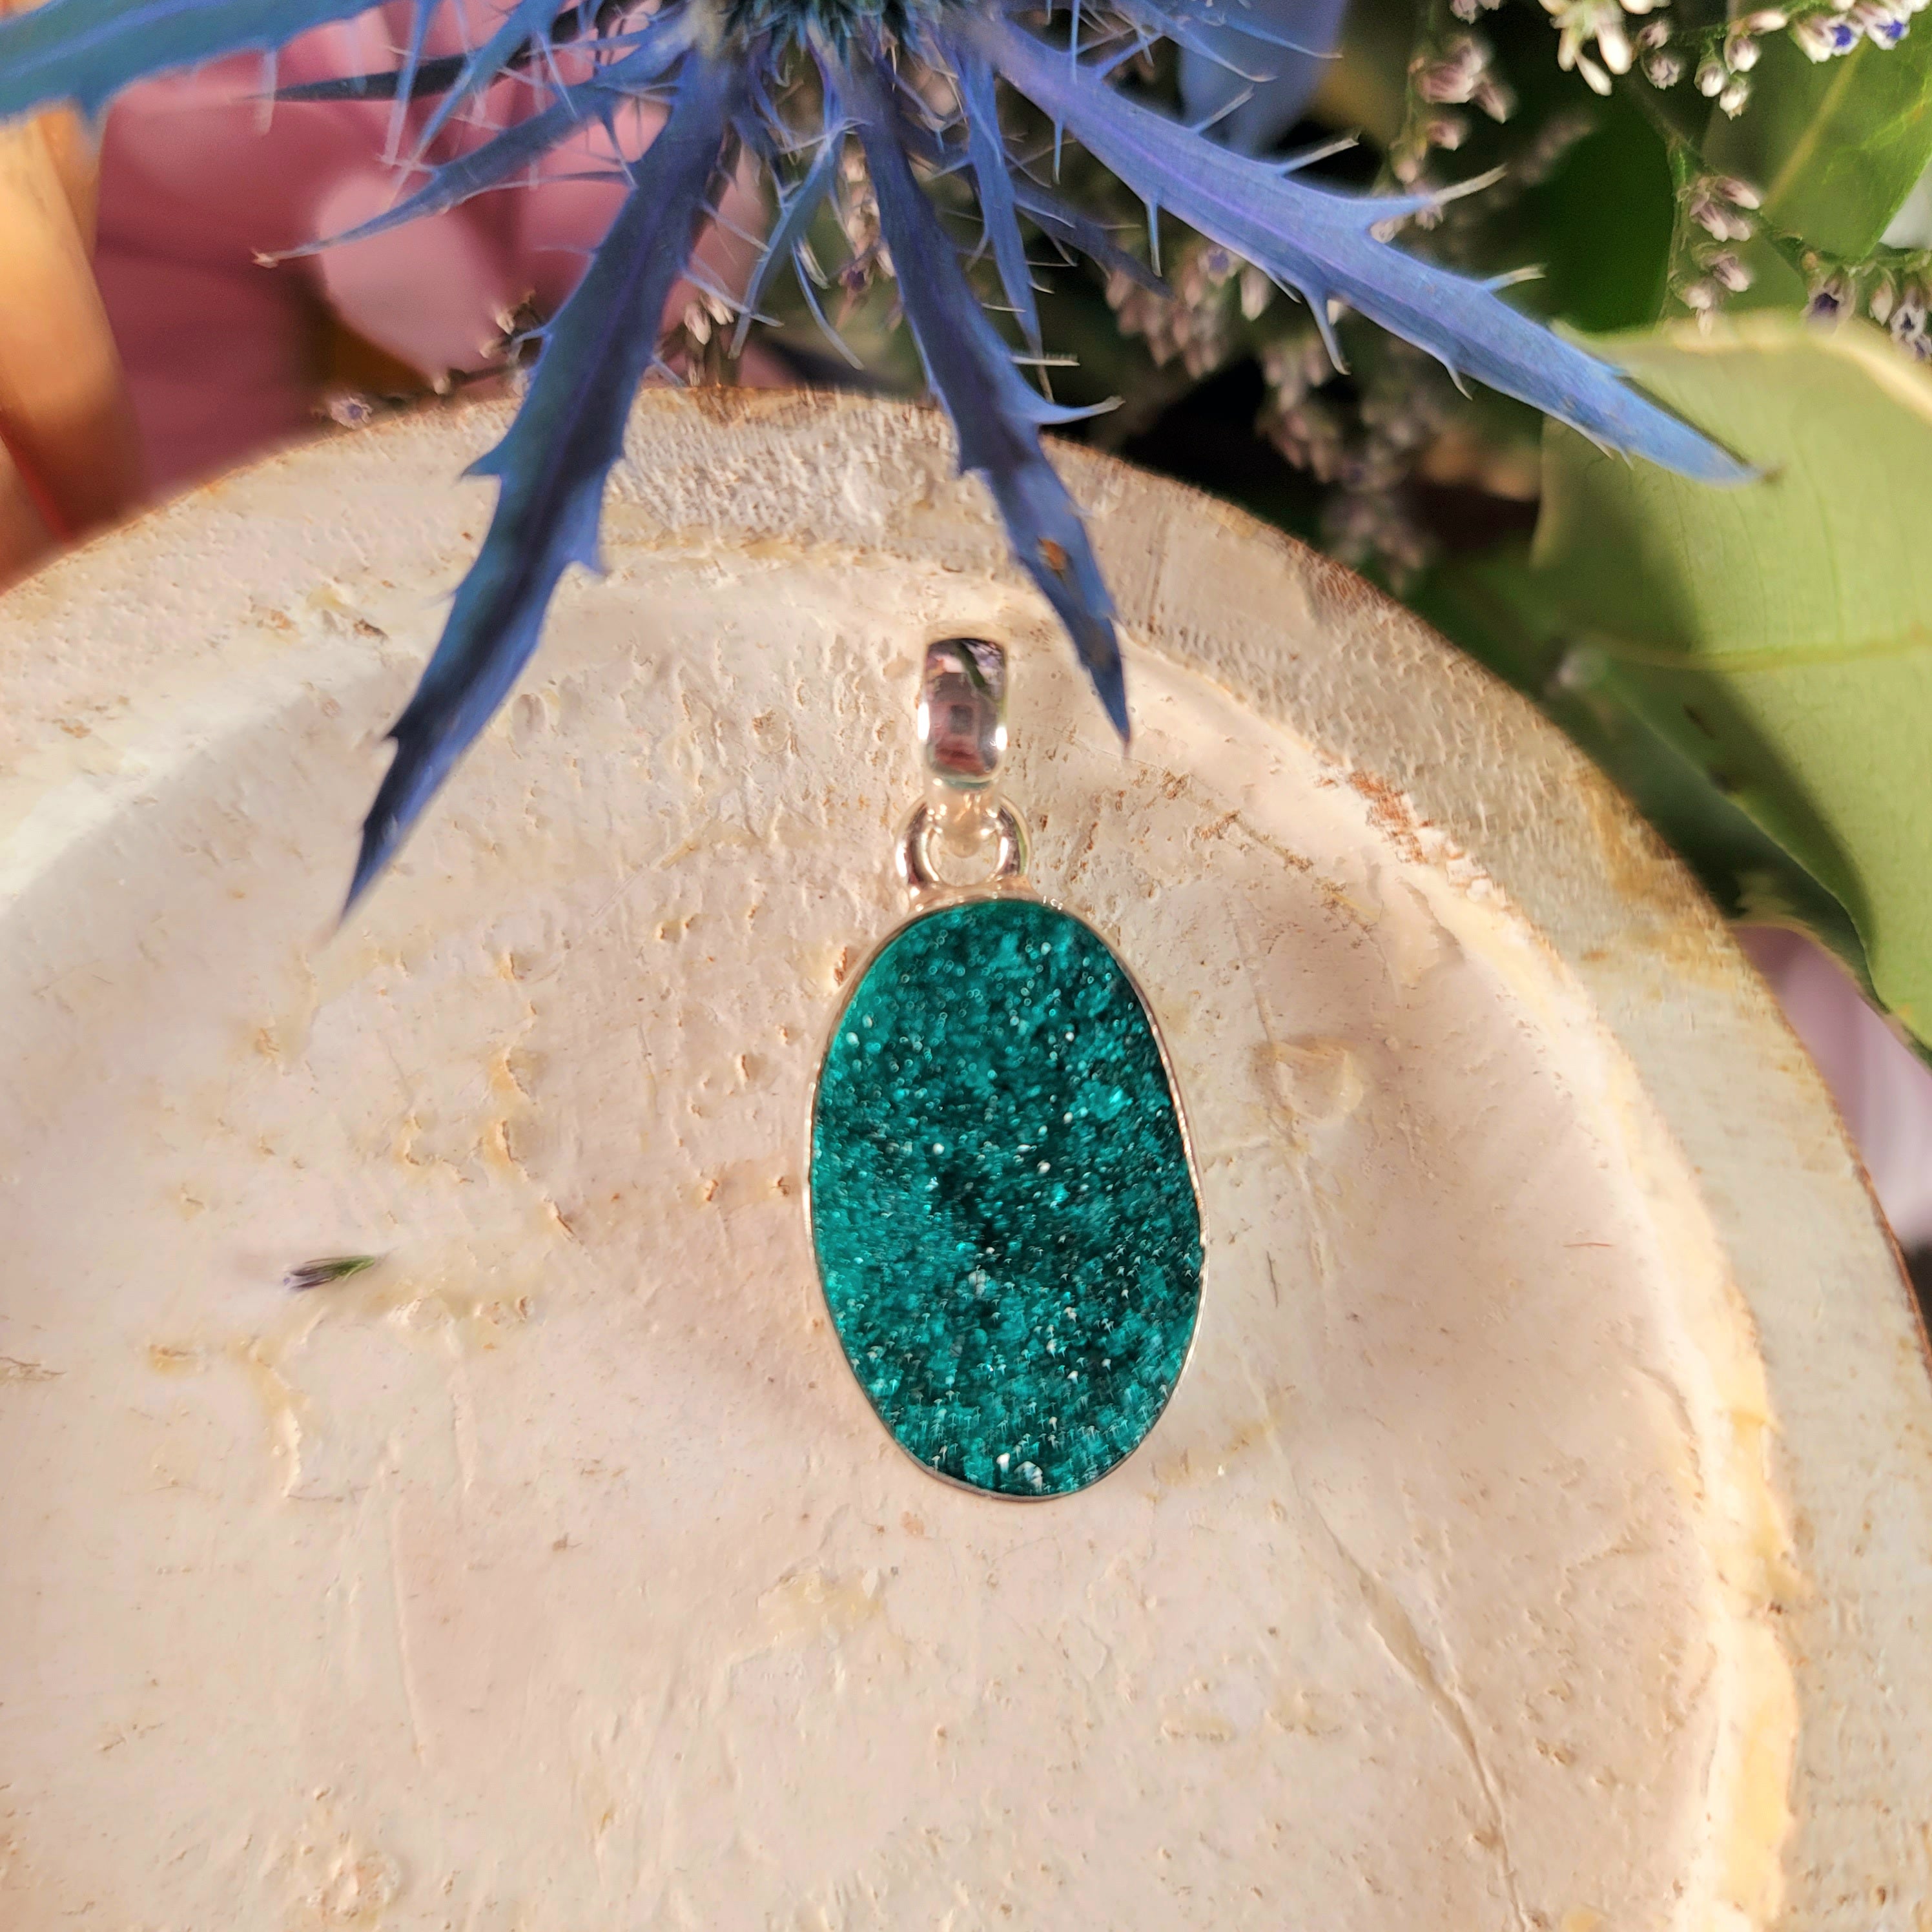 Druzy Raw Dioptase Pendant (High Quality) for Grief, Depression and Anxiety